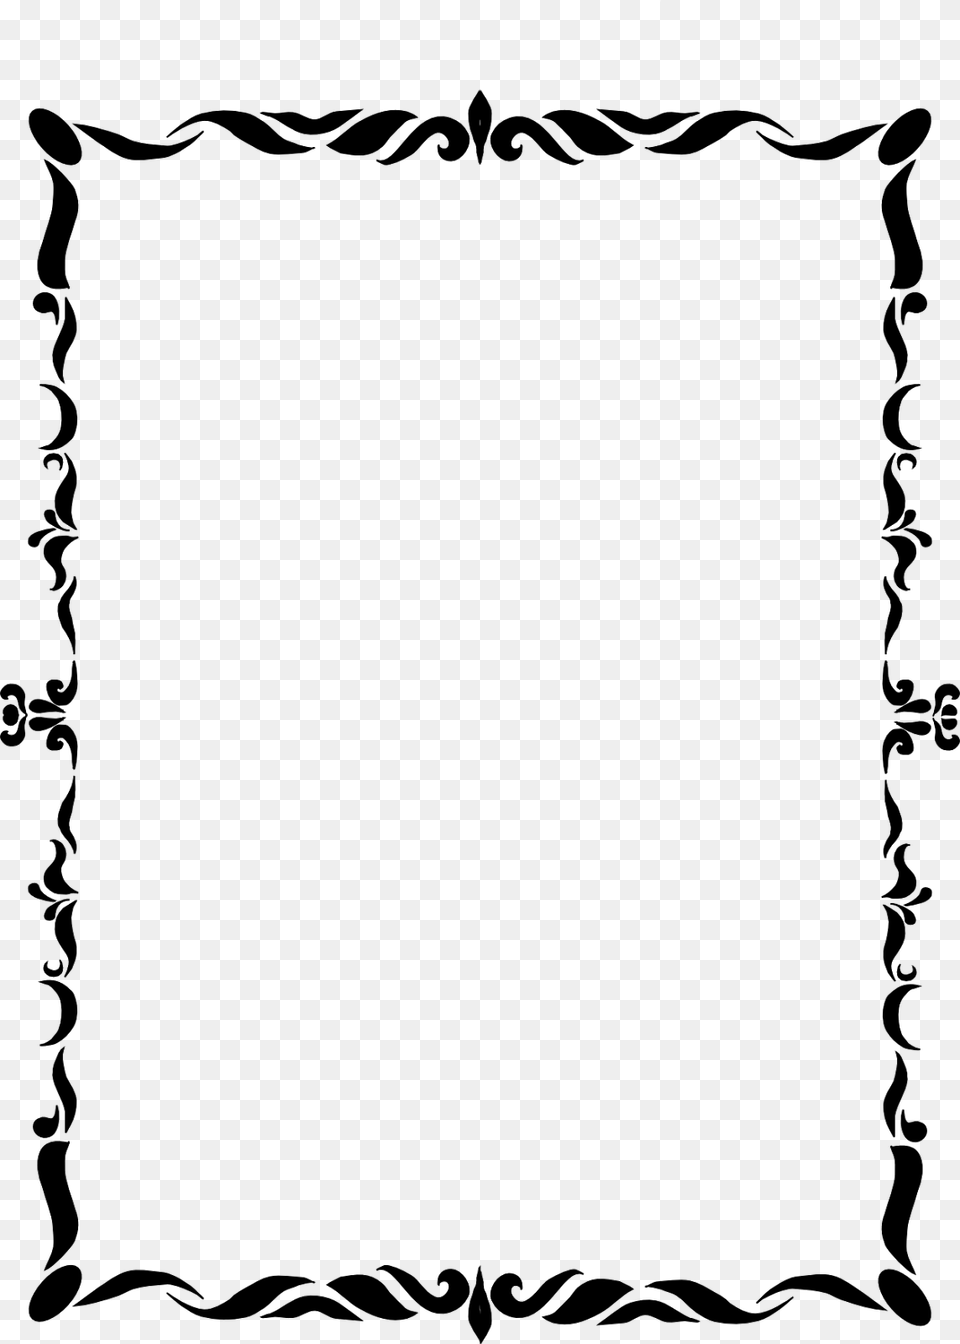 Borders And Frames Picture Border Design Simple, Gray Free Png Download